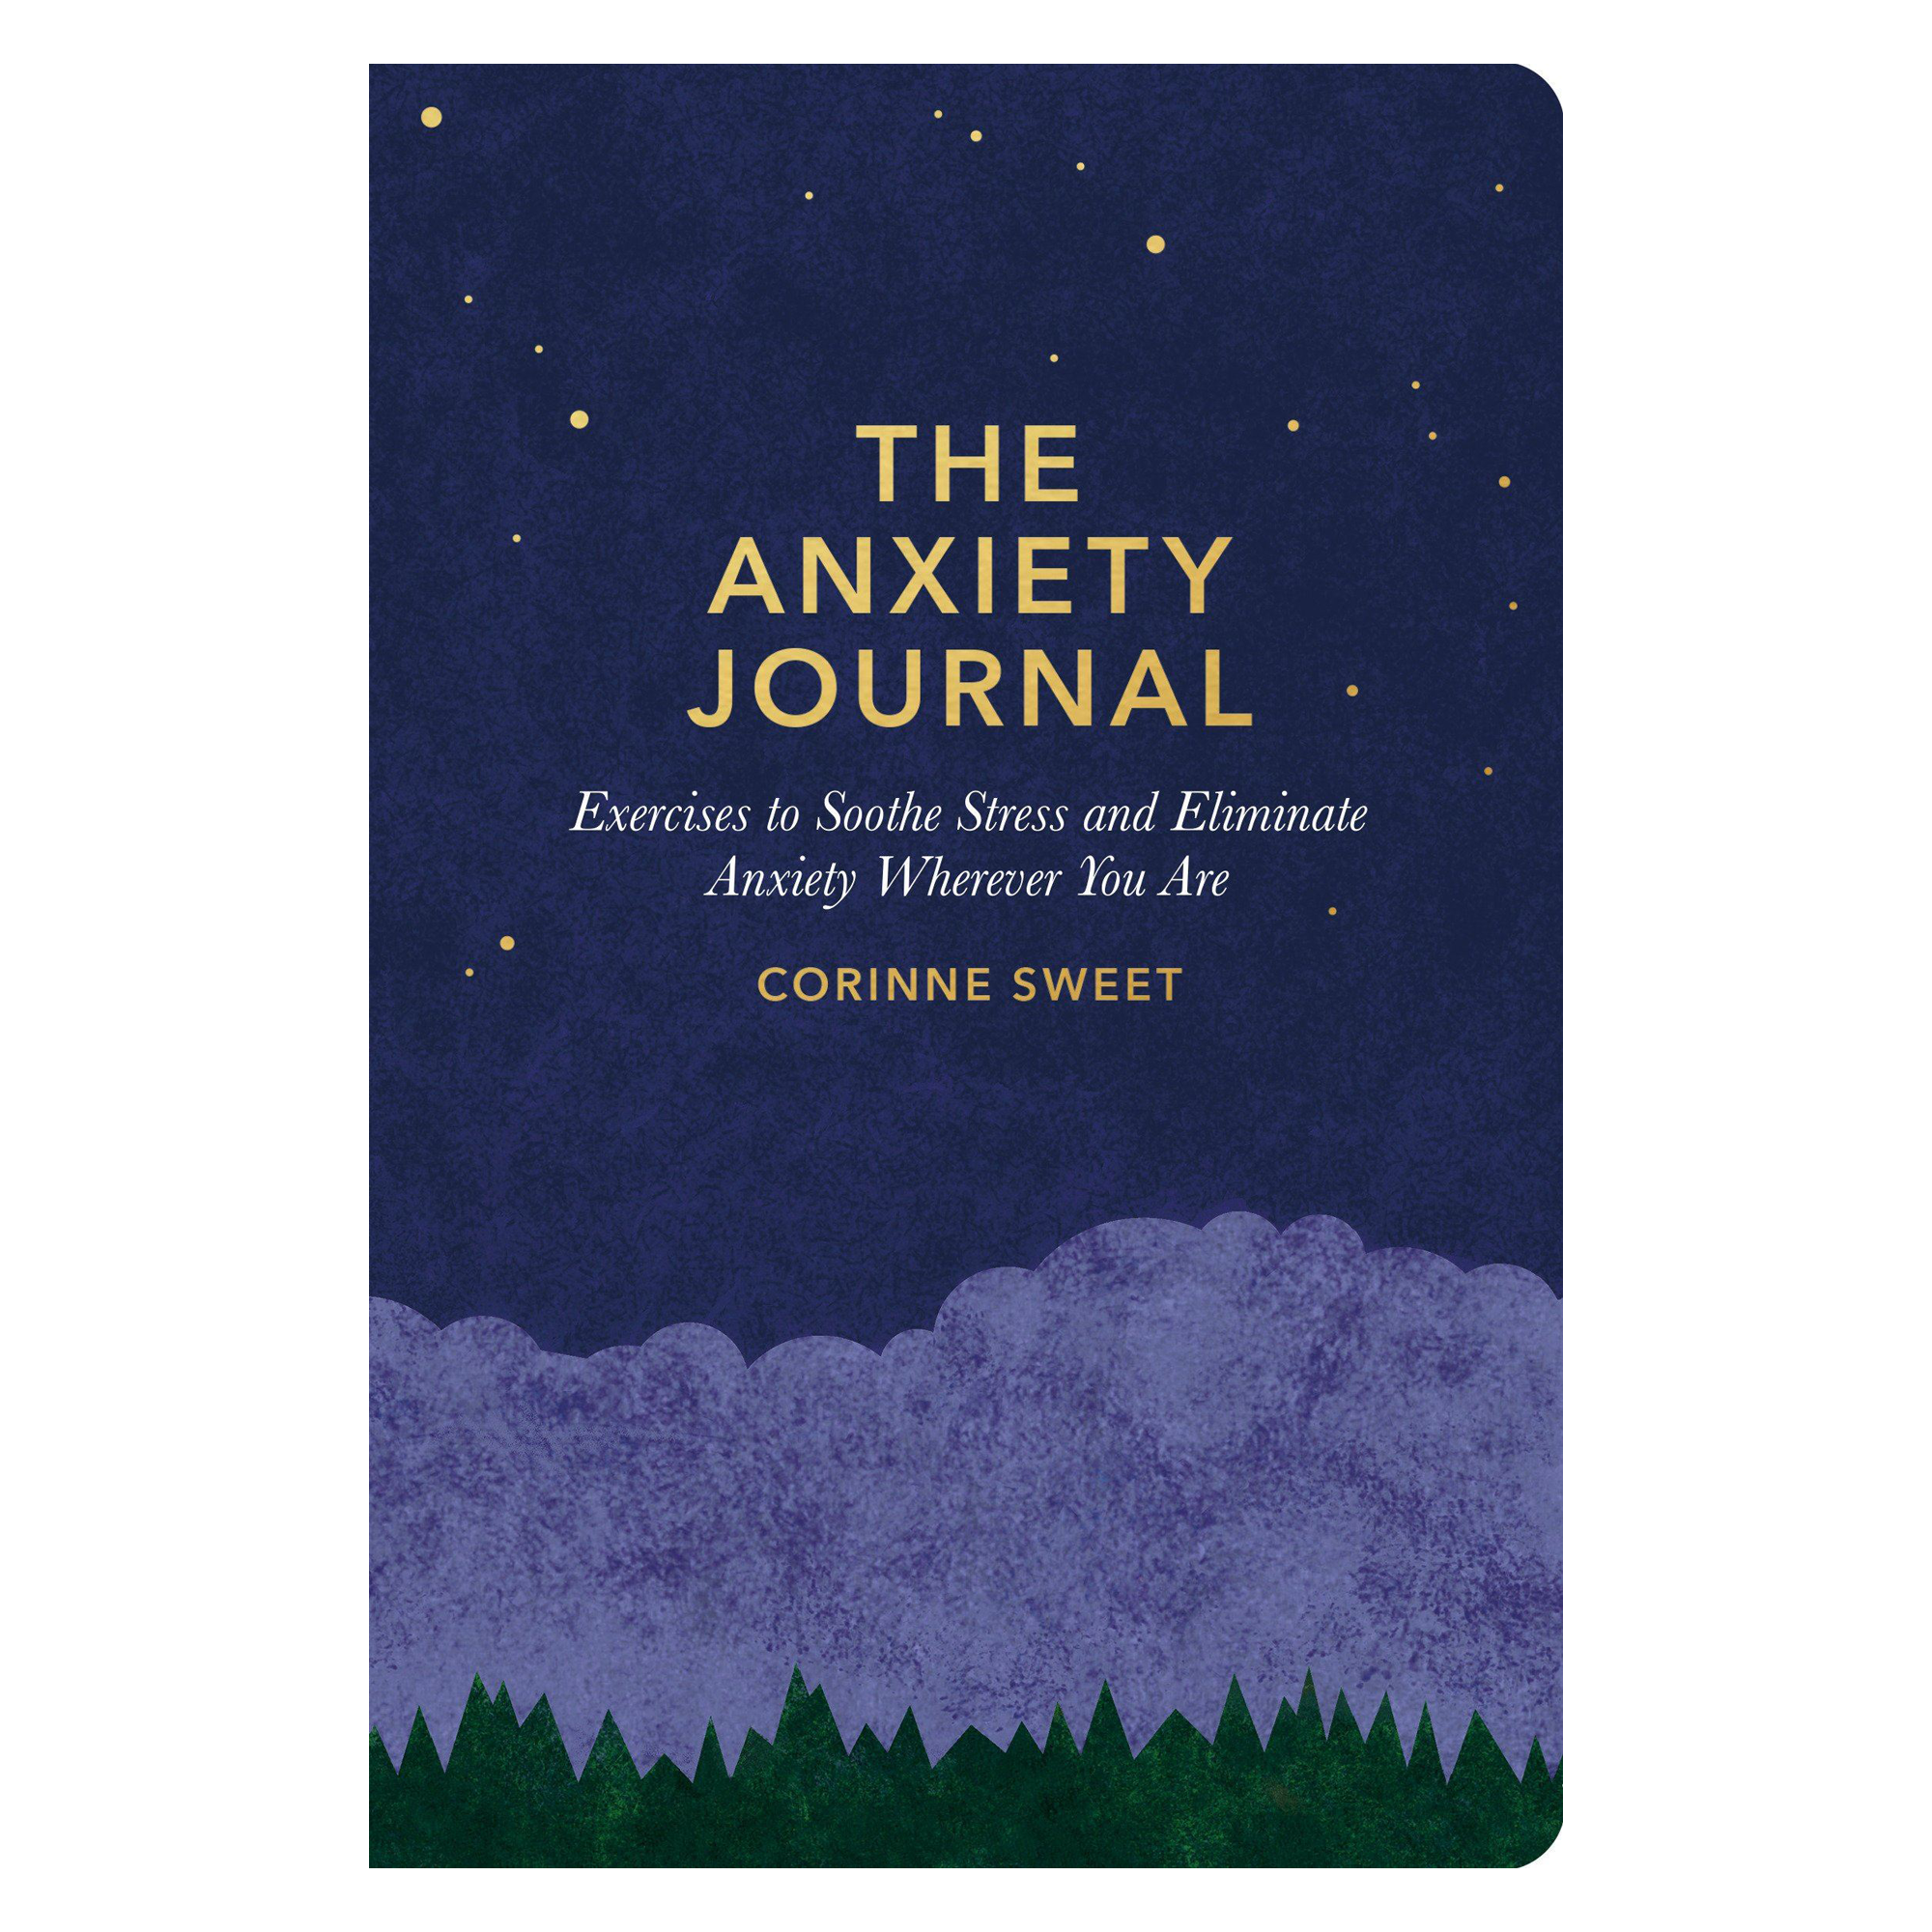 Front cover of the Anxiety Journal. Nighttime landscape with stars and title printed in yellow font.